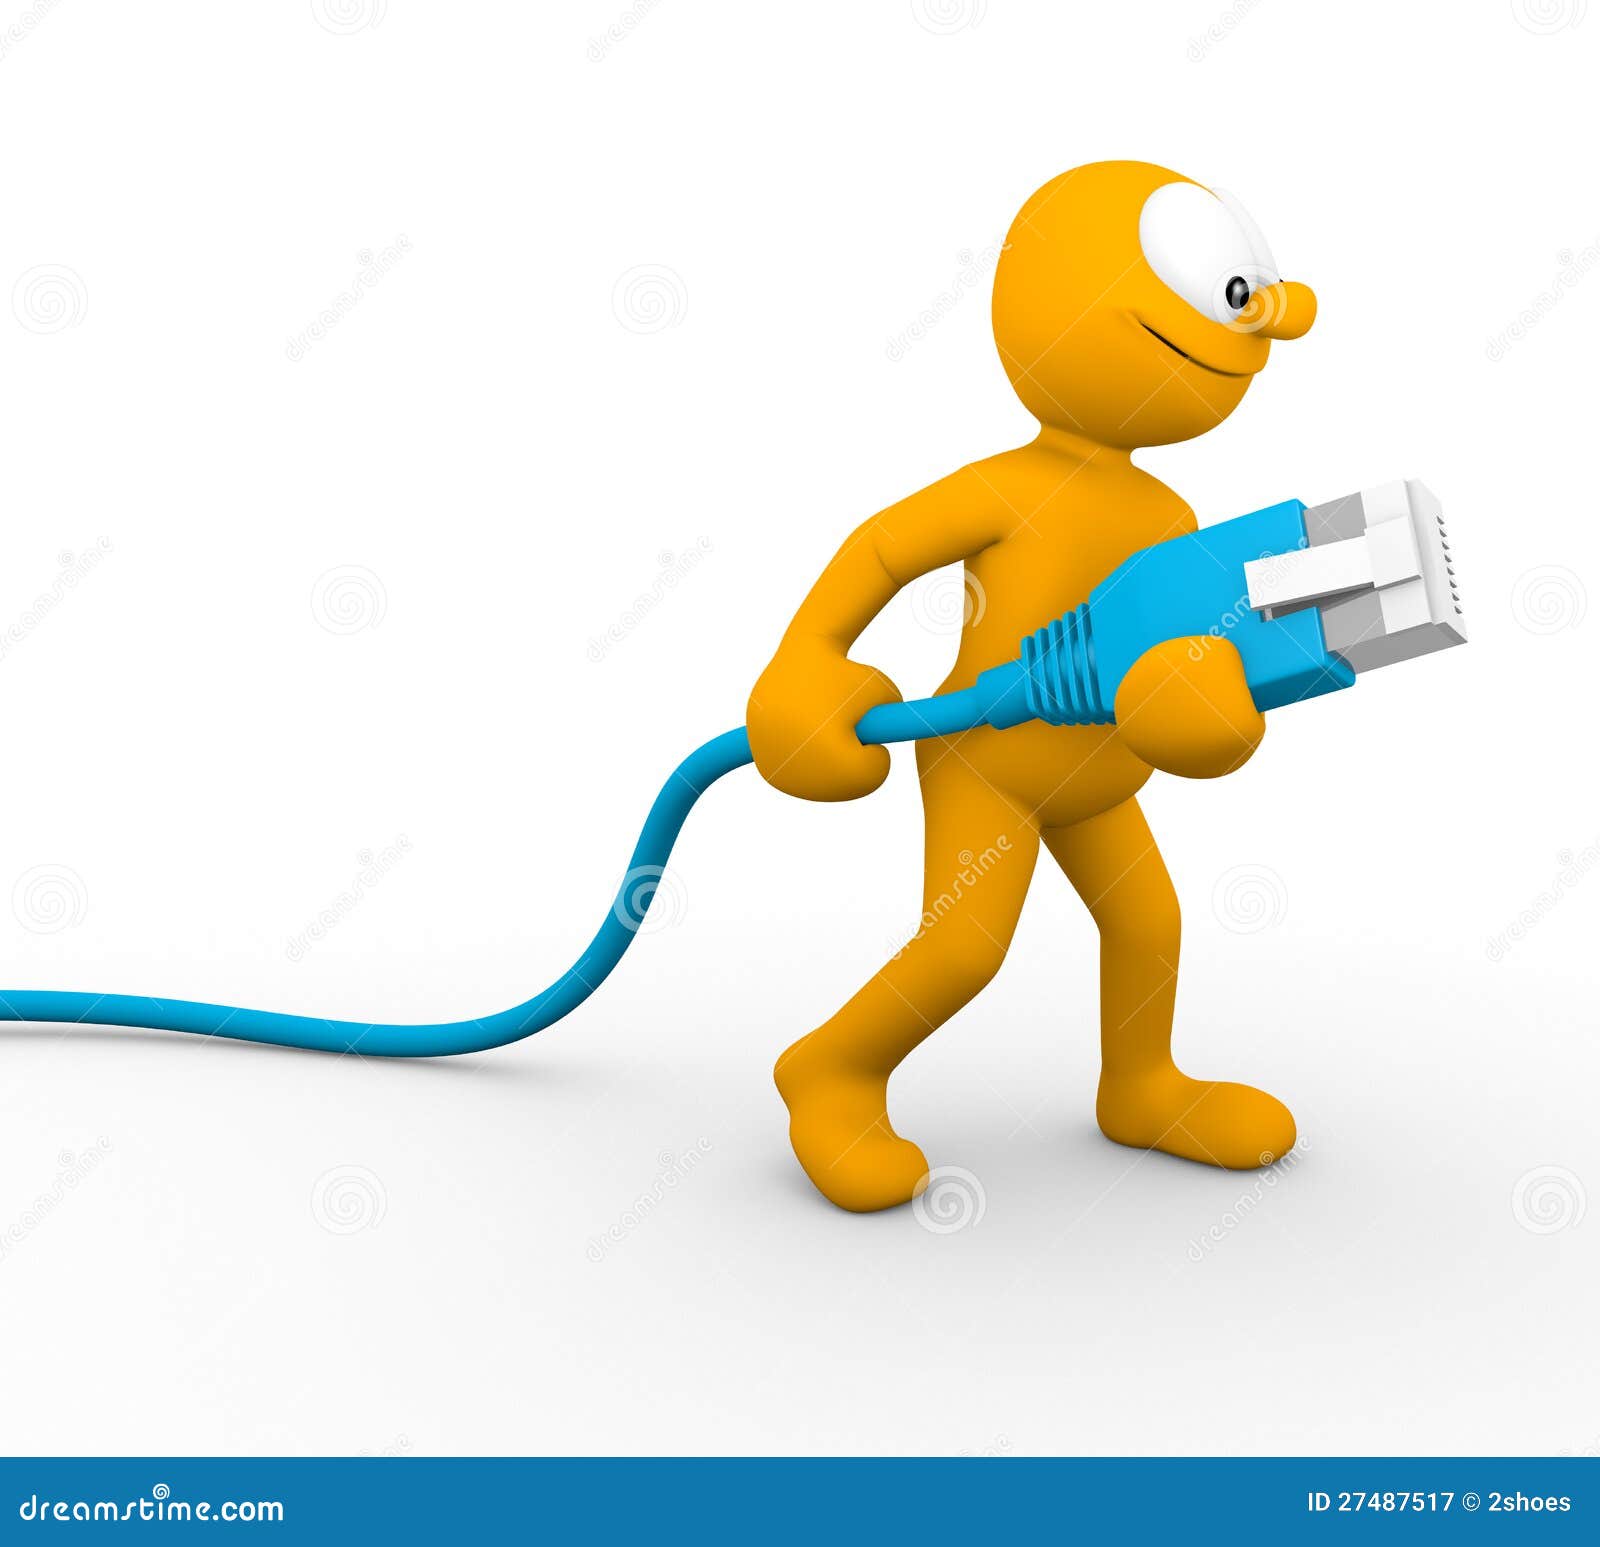 clipart network cable - photo #16